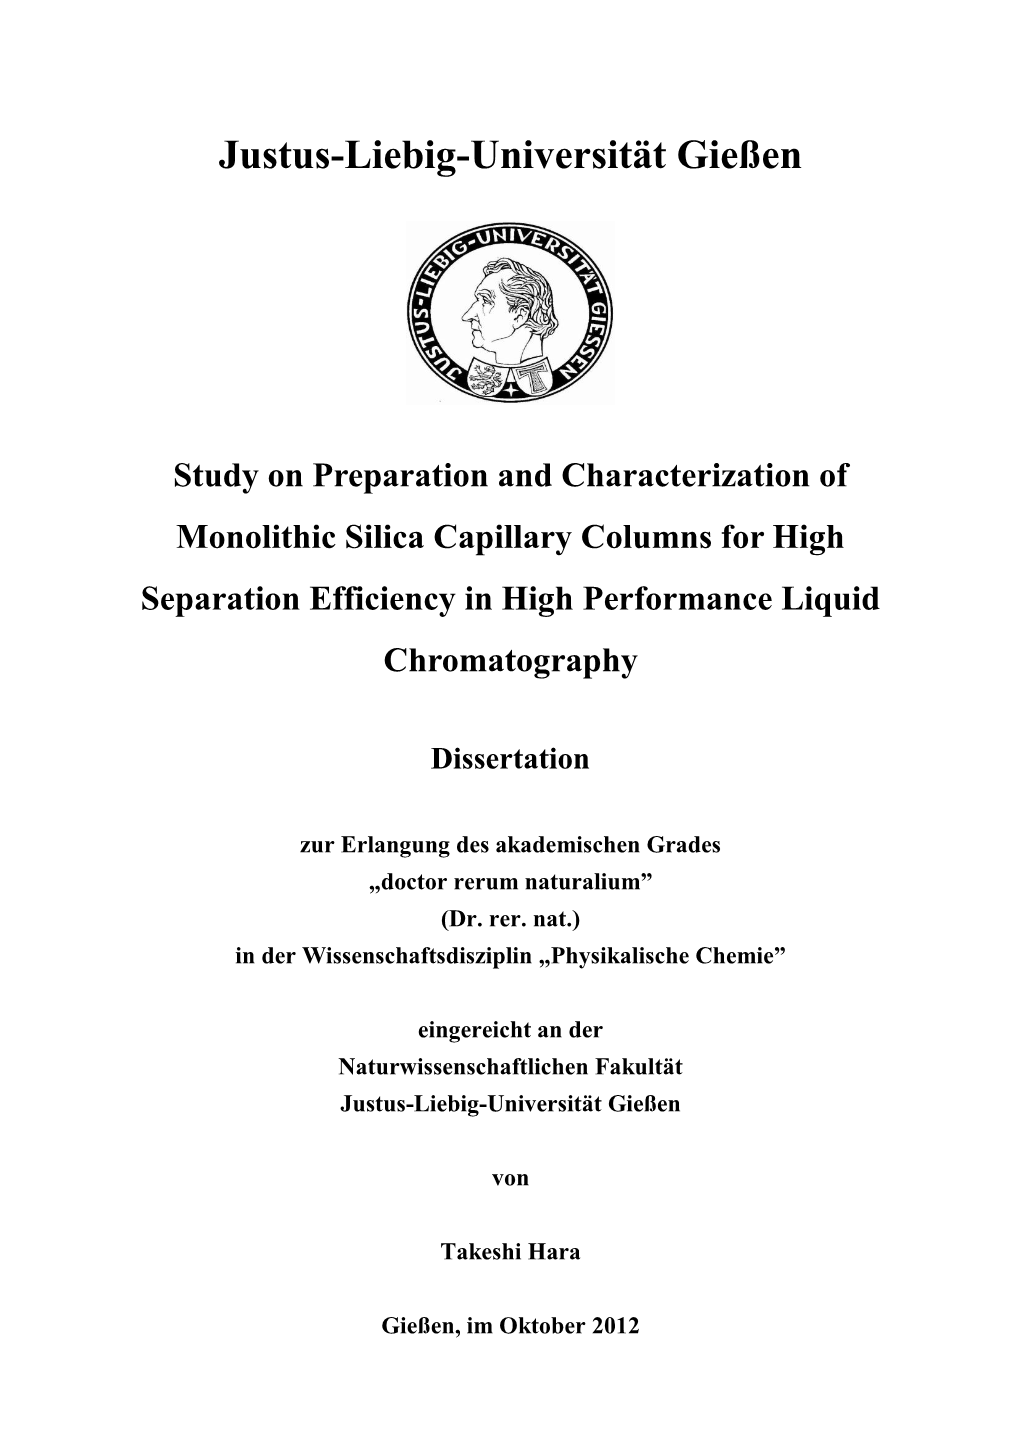 Study on Preparation and Characterization of Monolithic Silica Capillary Columns for High Separation Efficiency in High Performance Liquid Chromatography